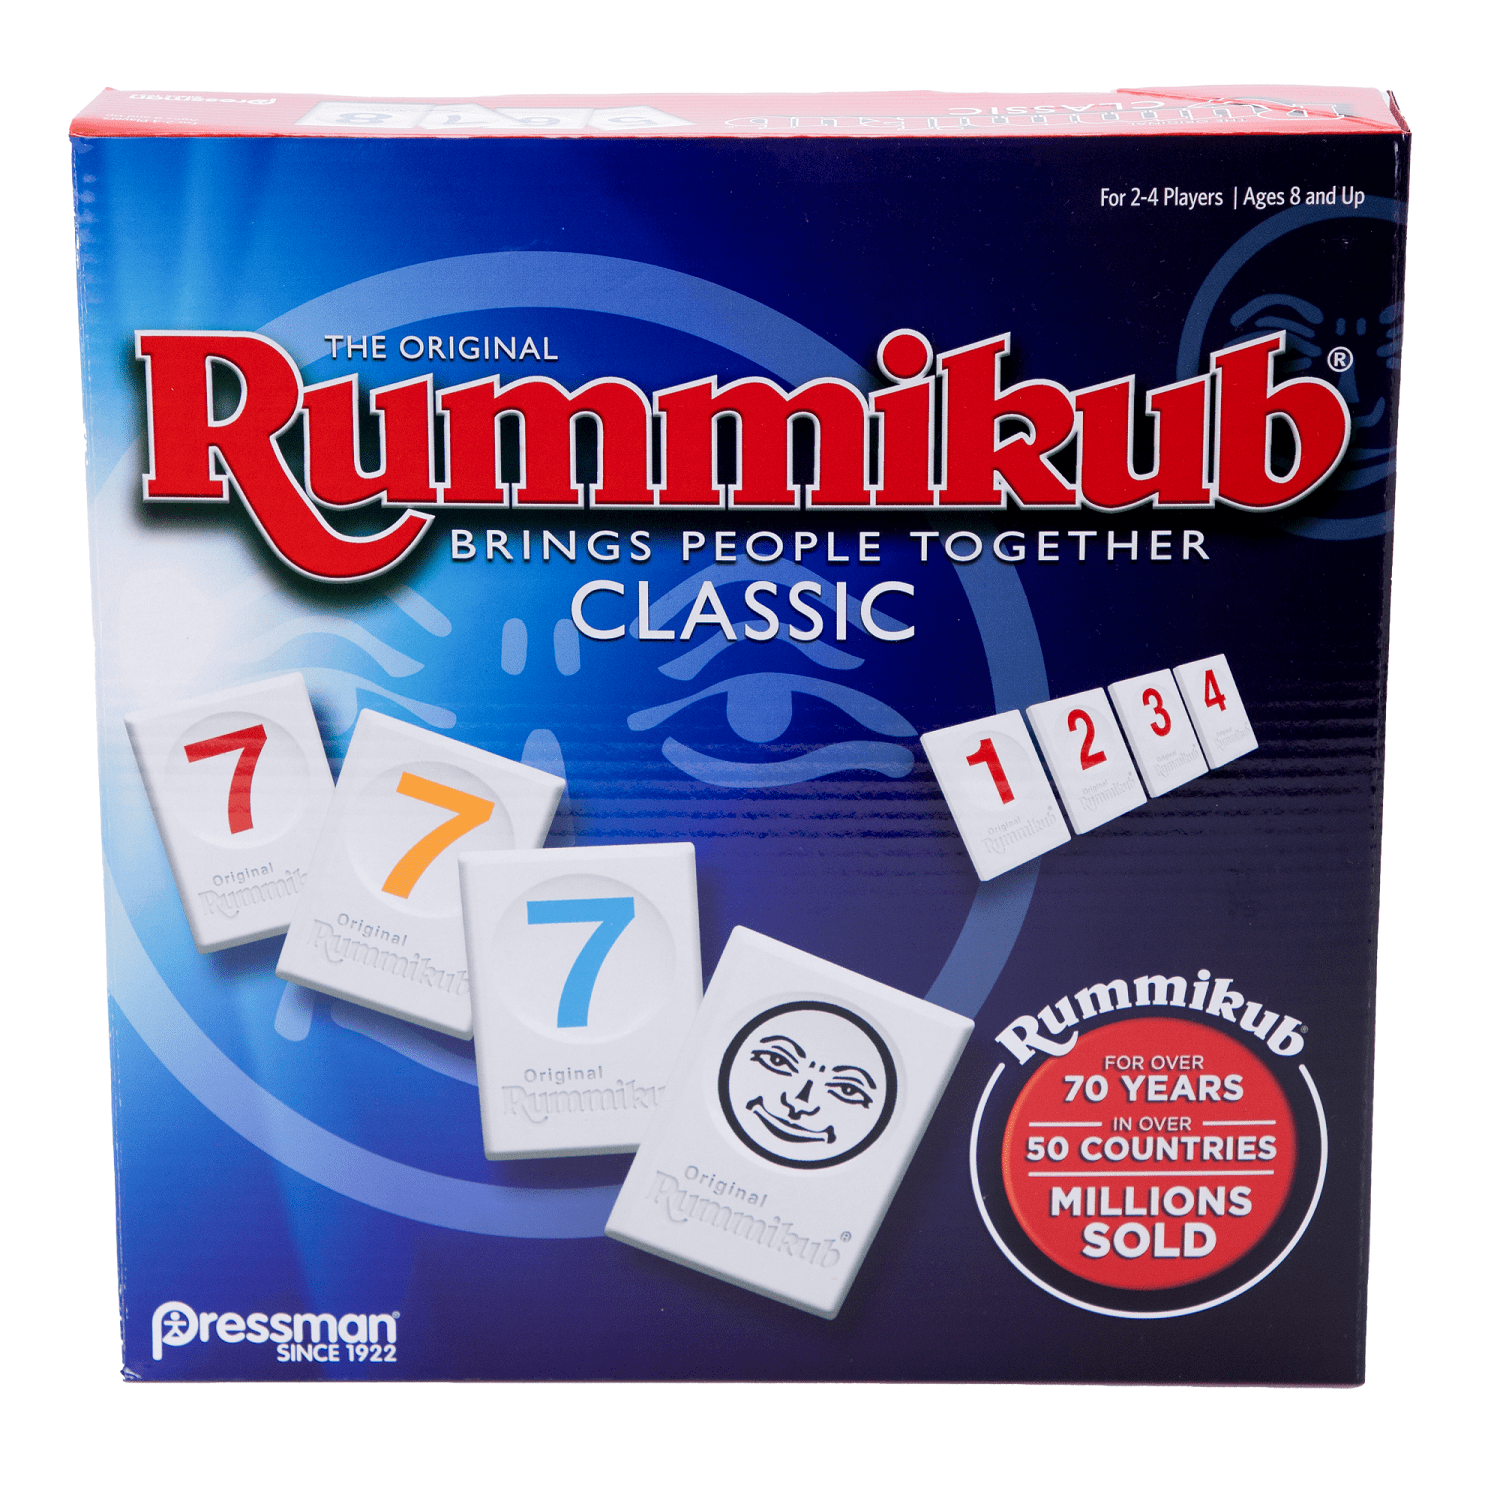 Pressman Rummikub Classic Edition Game - Original Rummy Tile Game for Kids and Adults